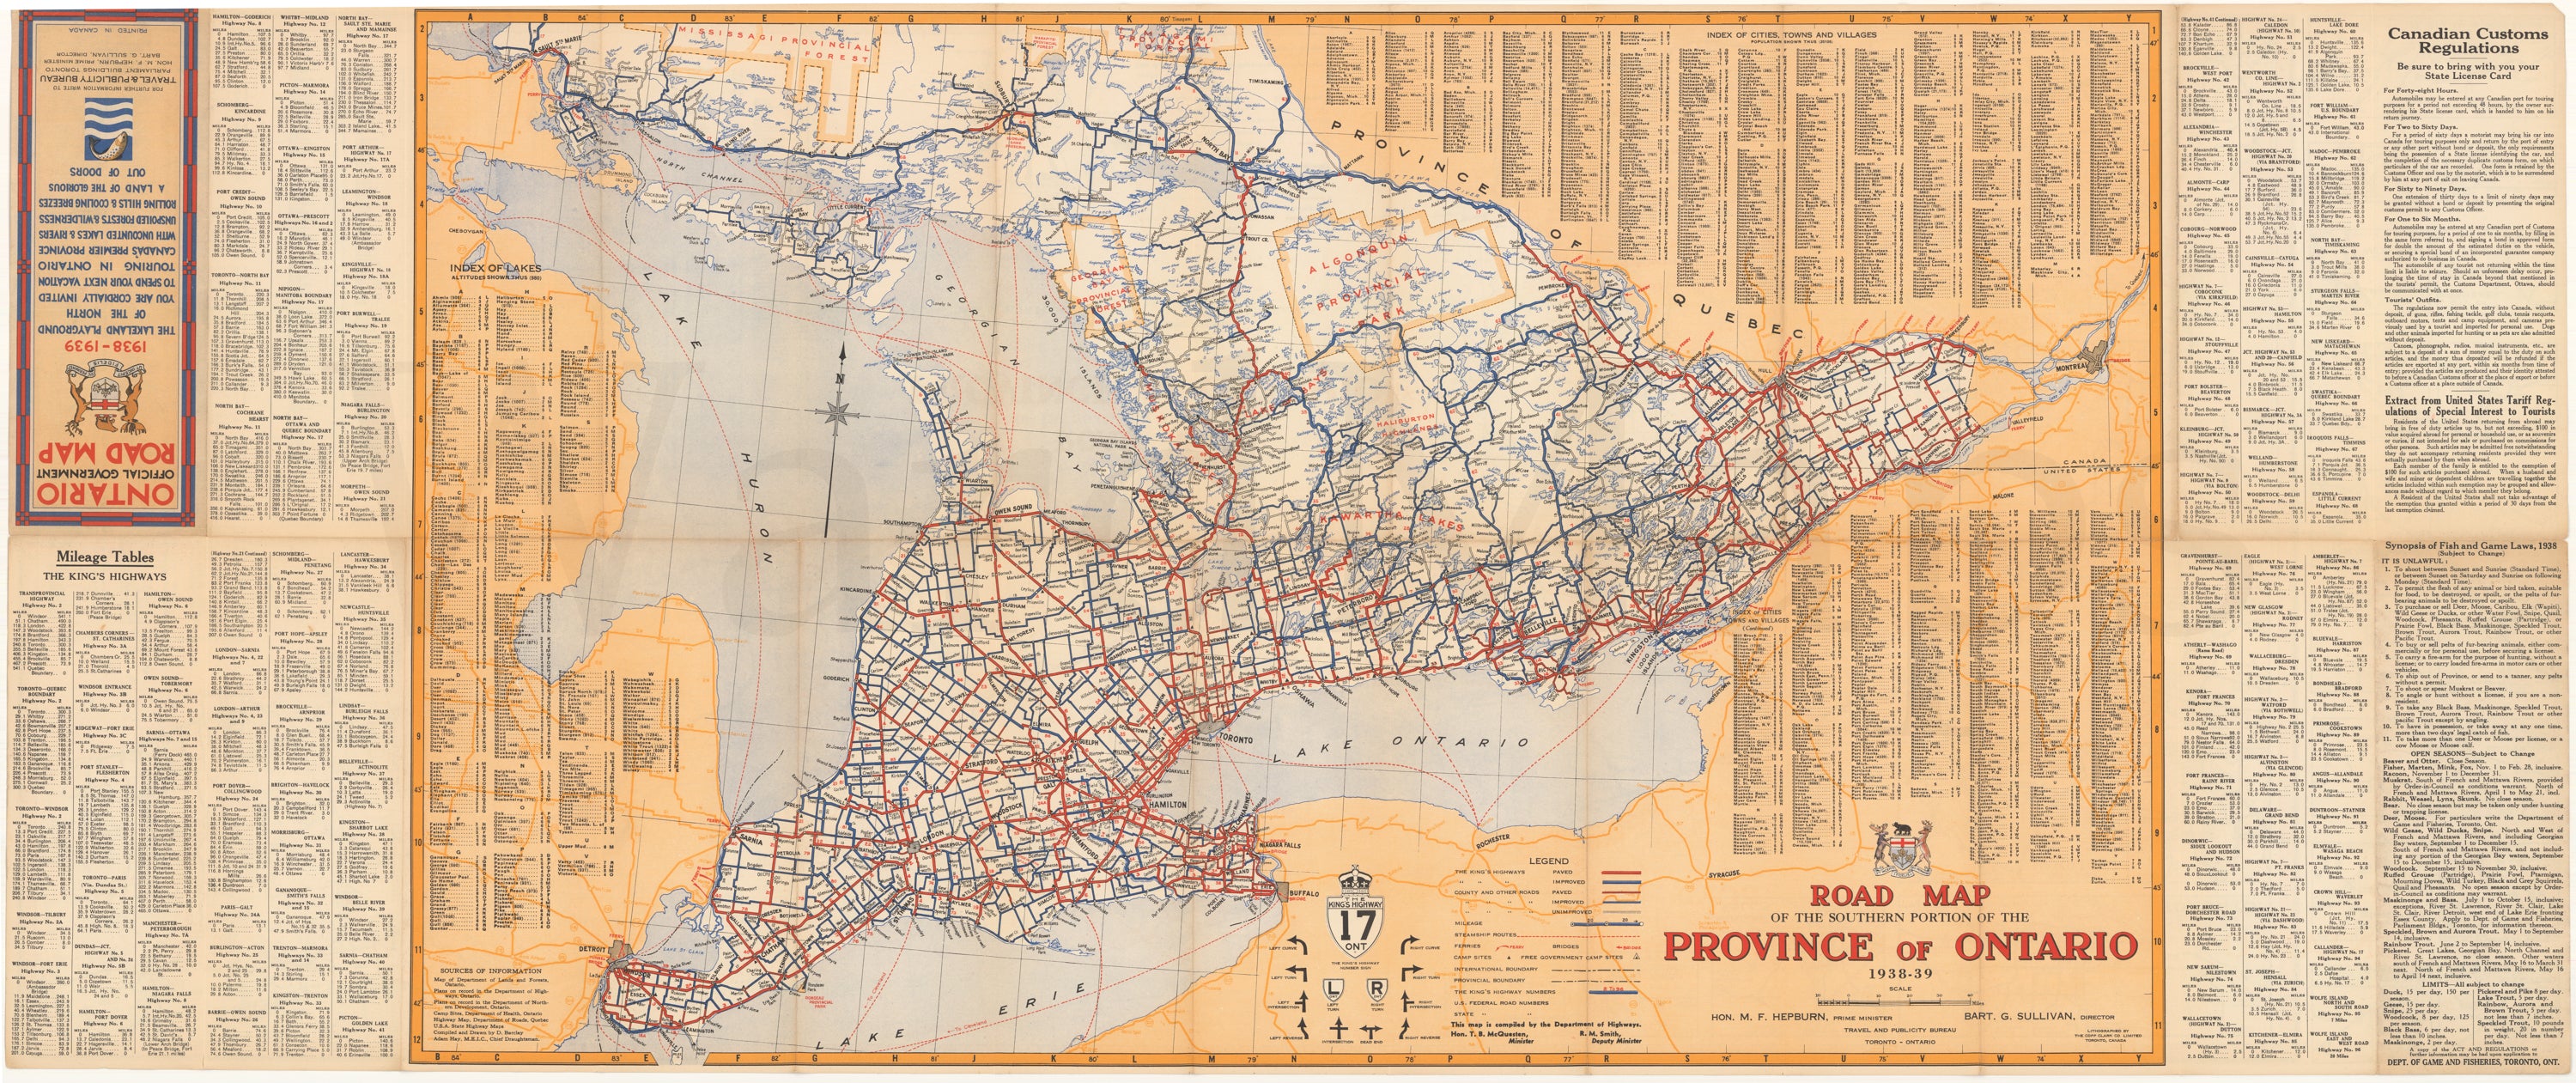 Ontario Road Map 1938-1939 (Northern Portion)